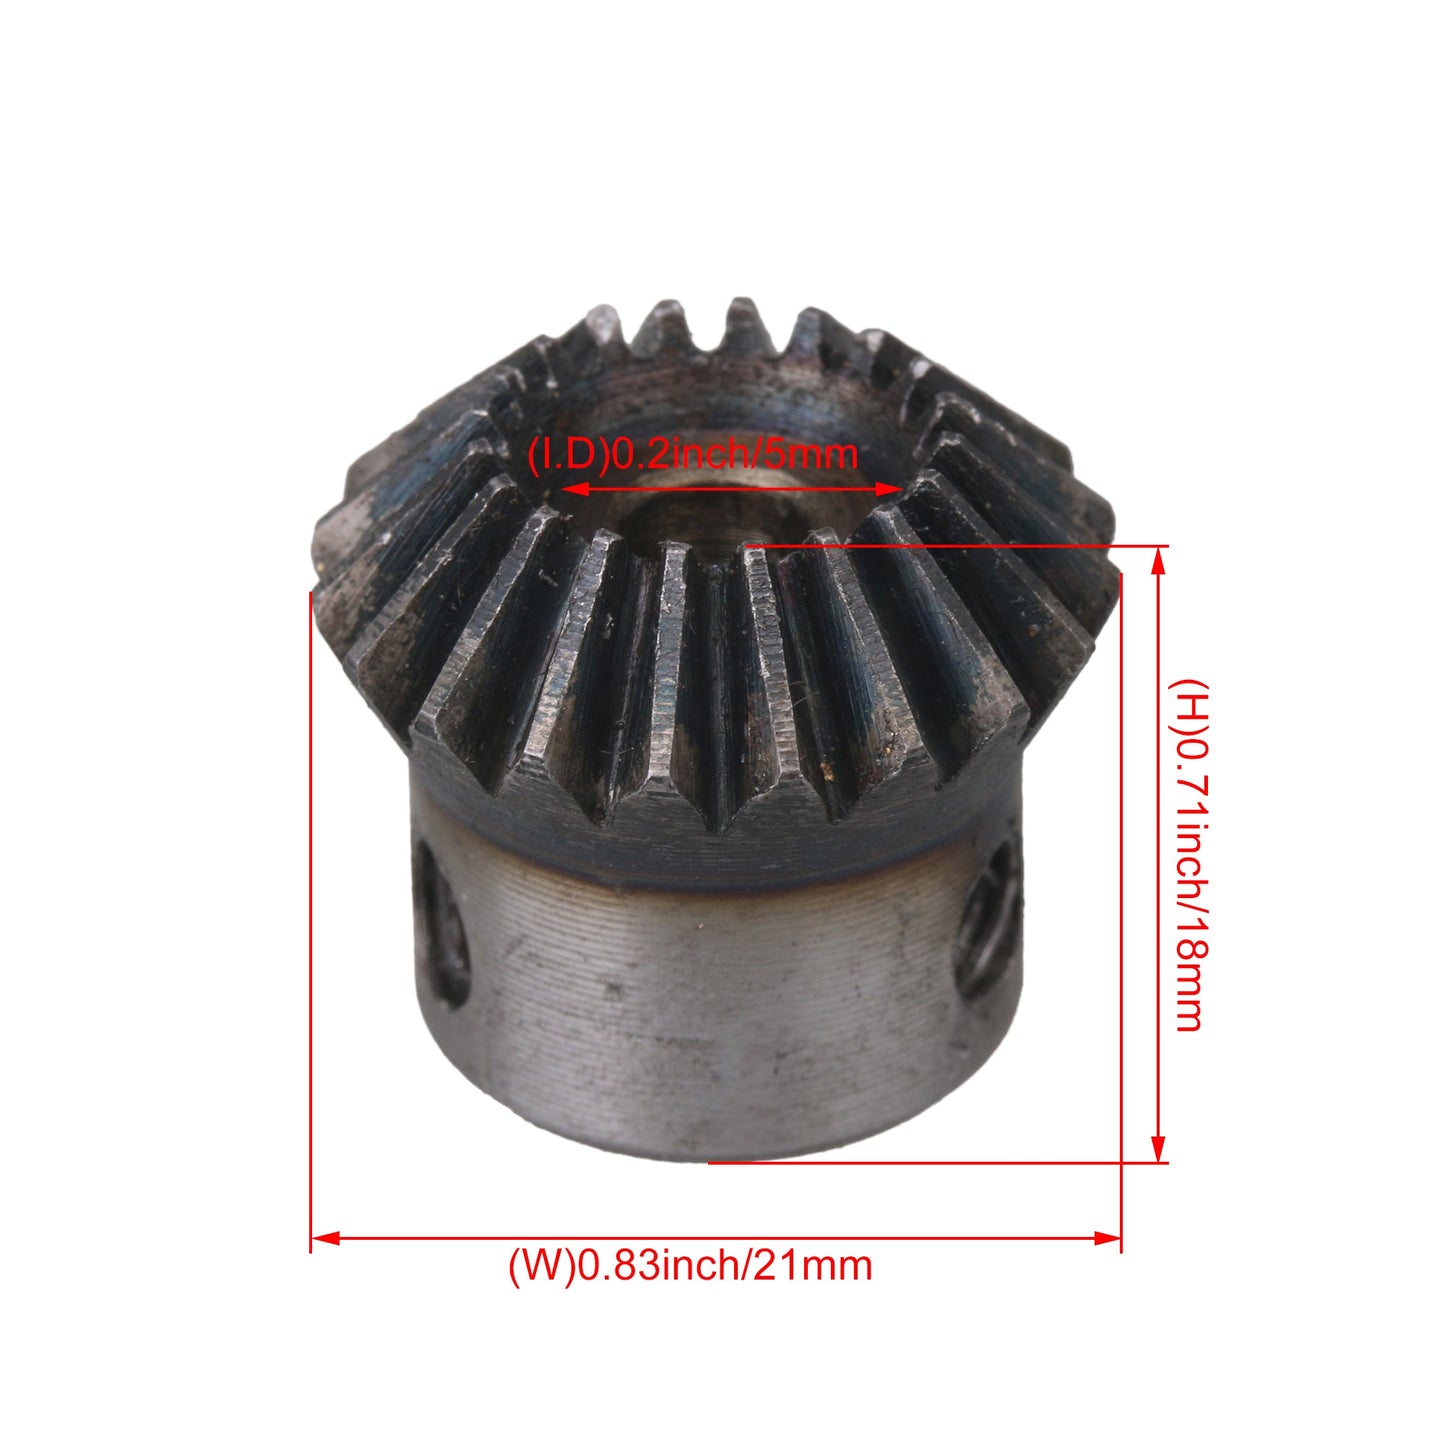 BQLZR Tapered Bevel Pinion Gear 5mm Hole Diar 45# Steel 1 Module 20 T Pack of 2